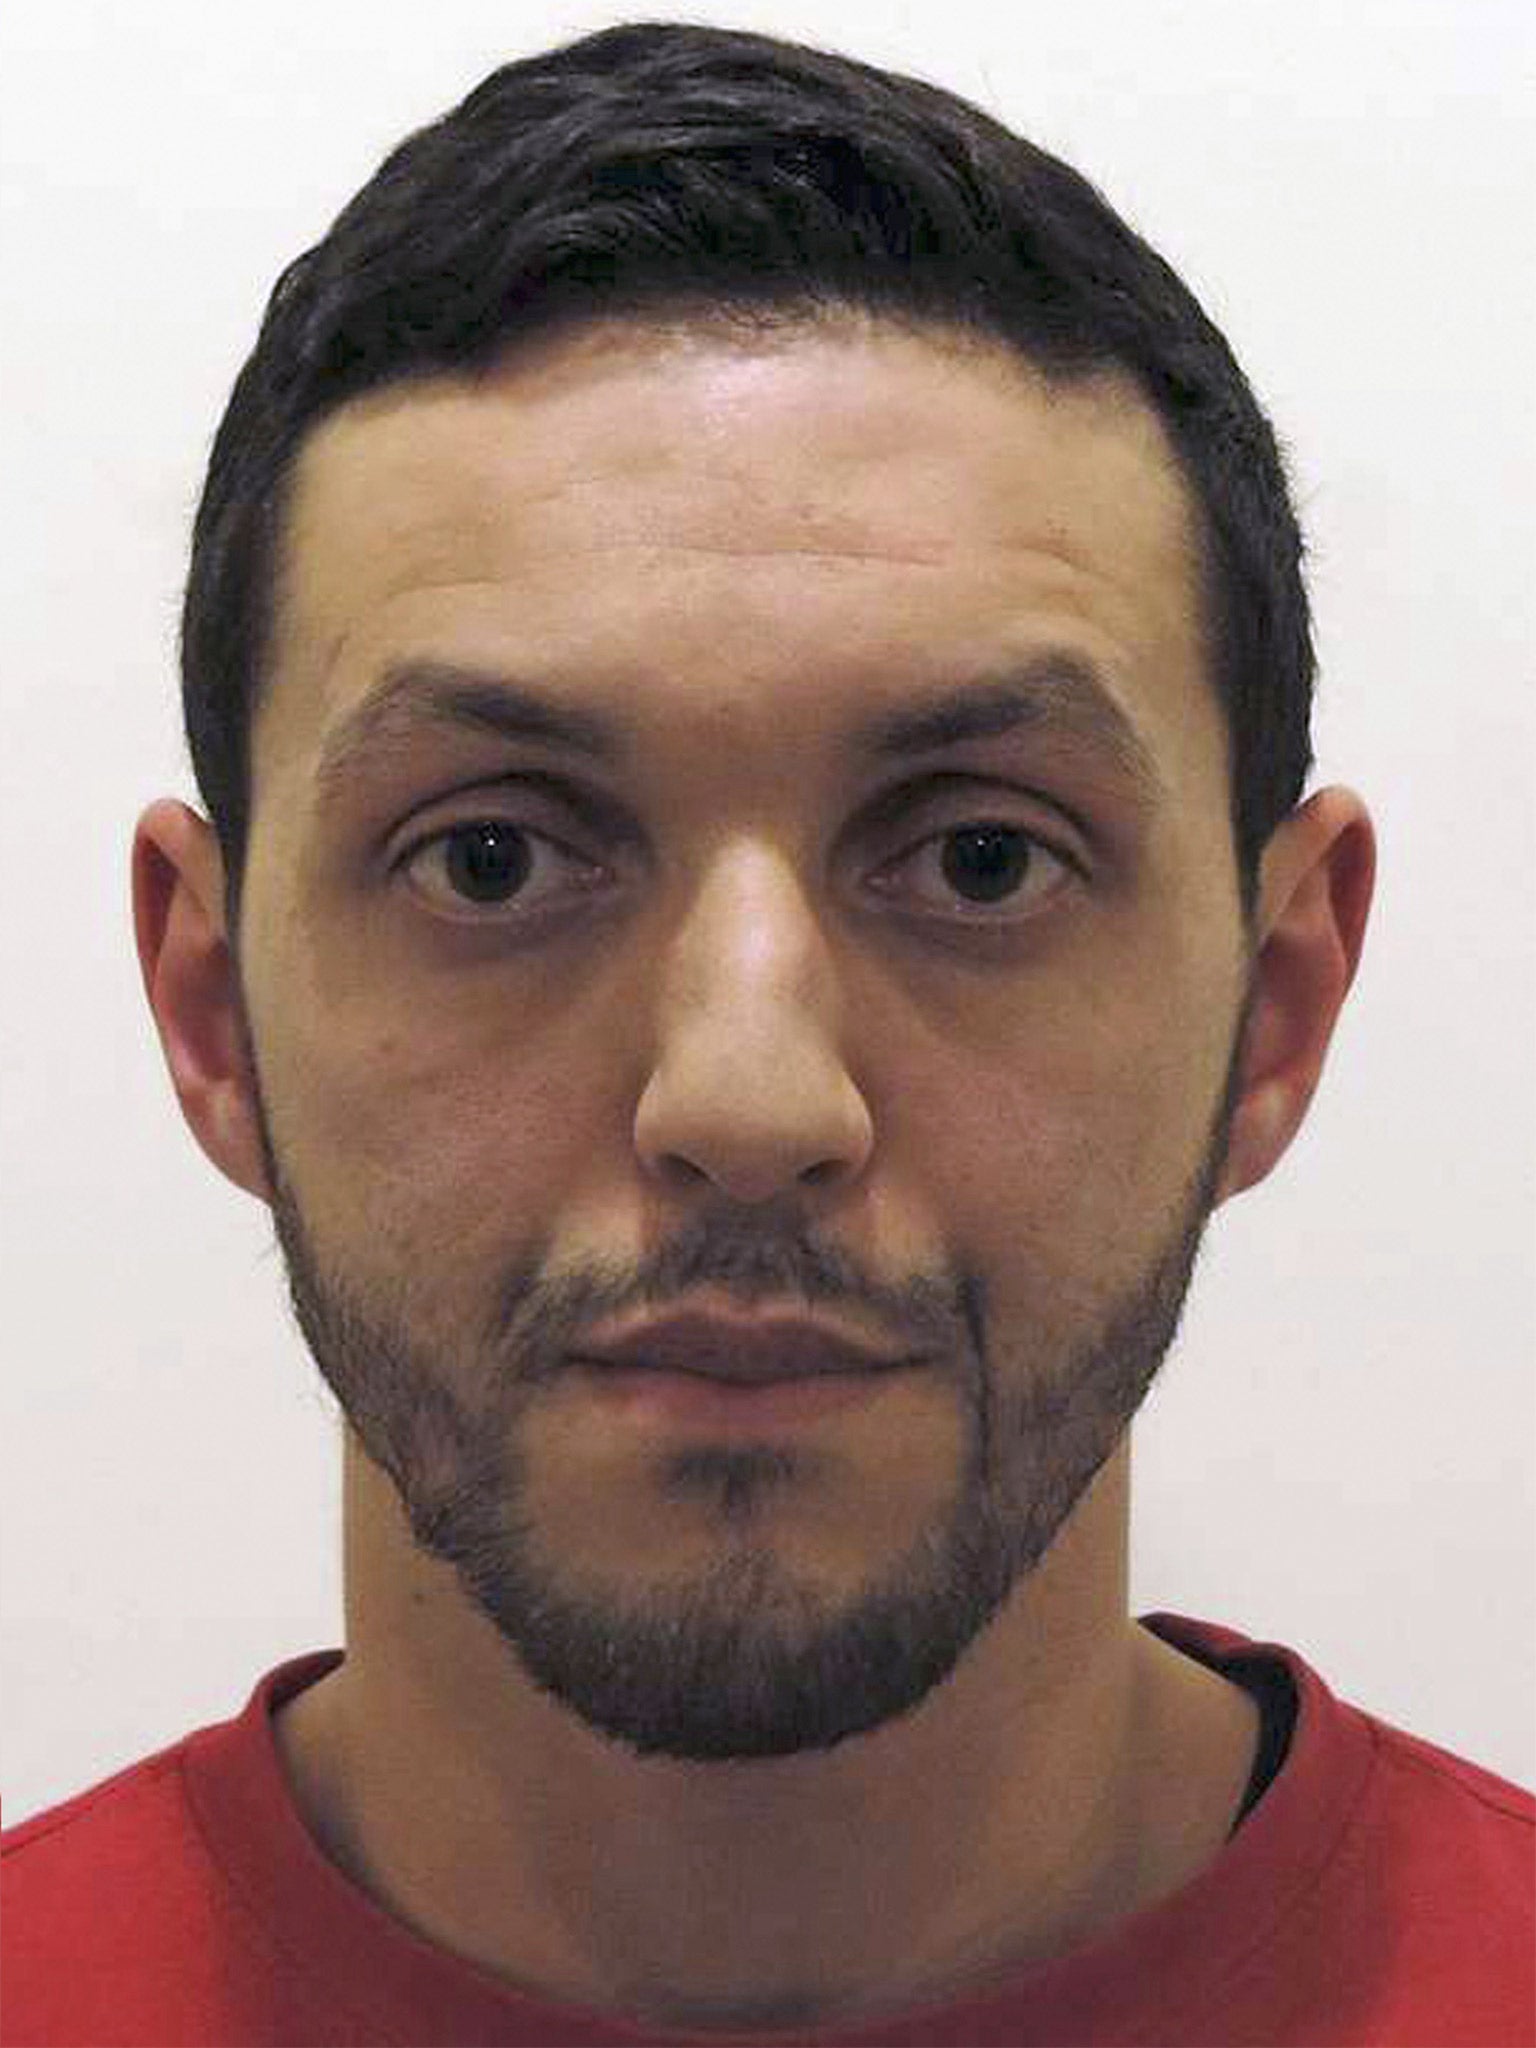 &#13;
Mohamed Abrini was filmed on November 11 driving a Renault Clio car that was used two days later in the Paris attacks&#13;